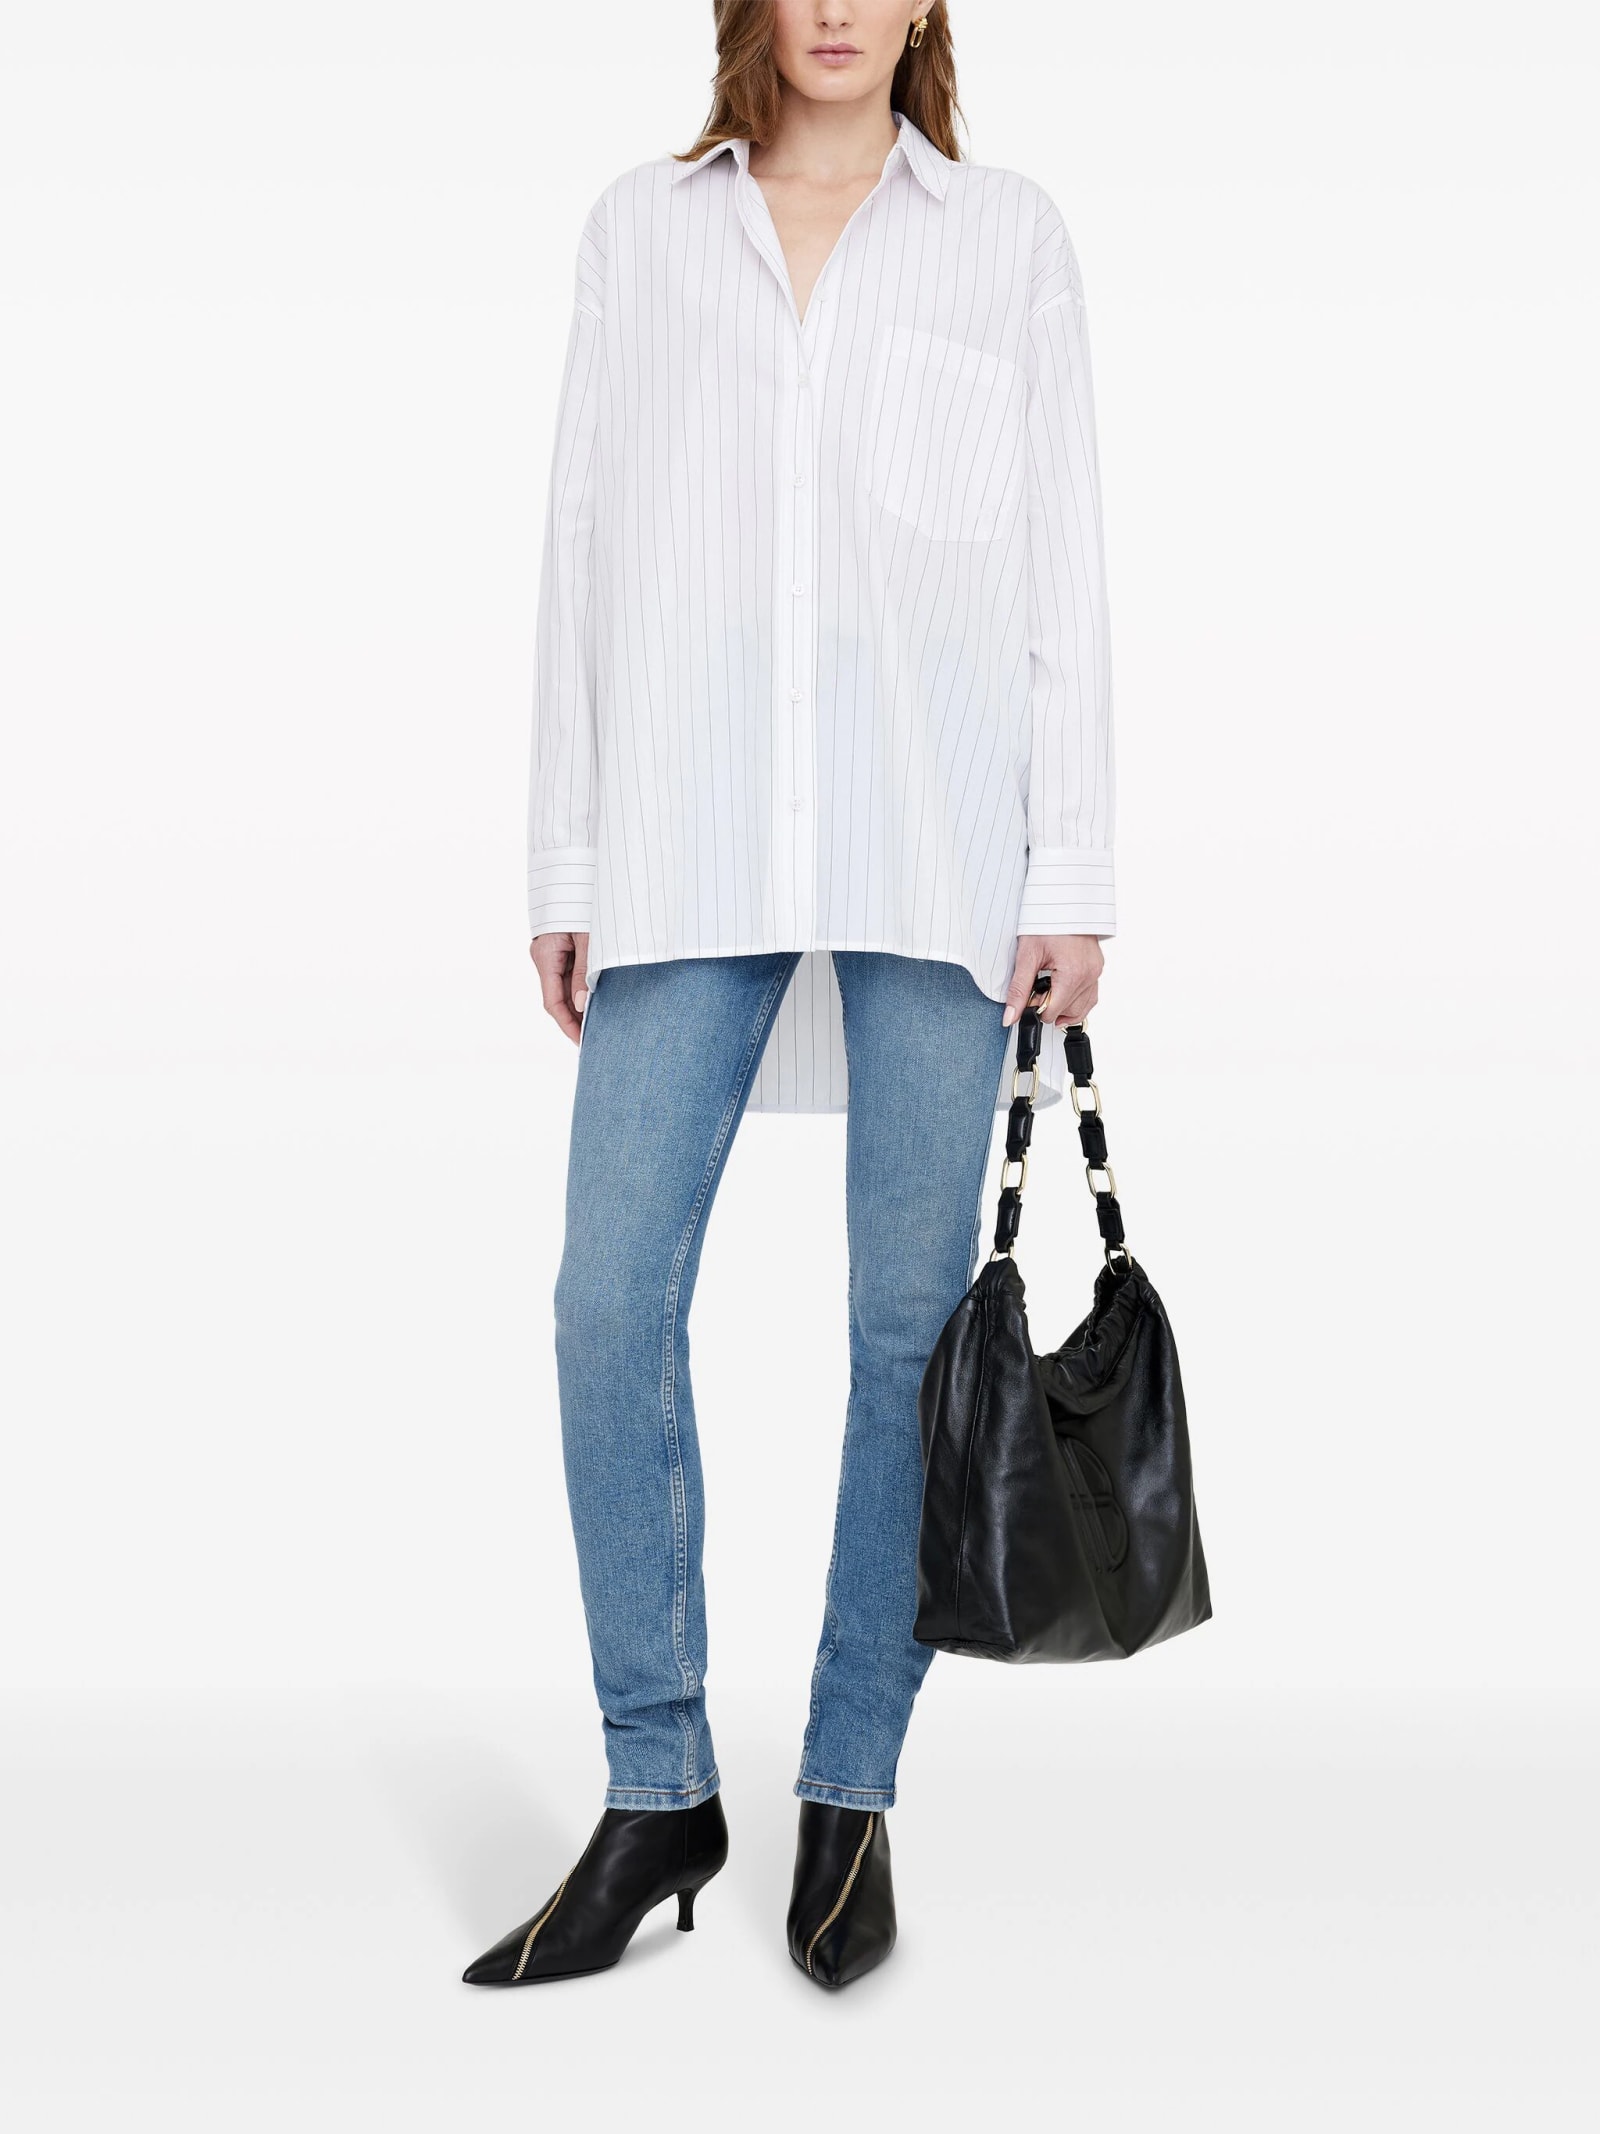 Shop Anine Bing Chrissy Shirt Stripe In White And Taupe